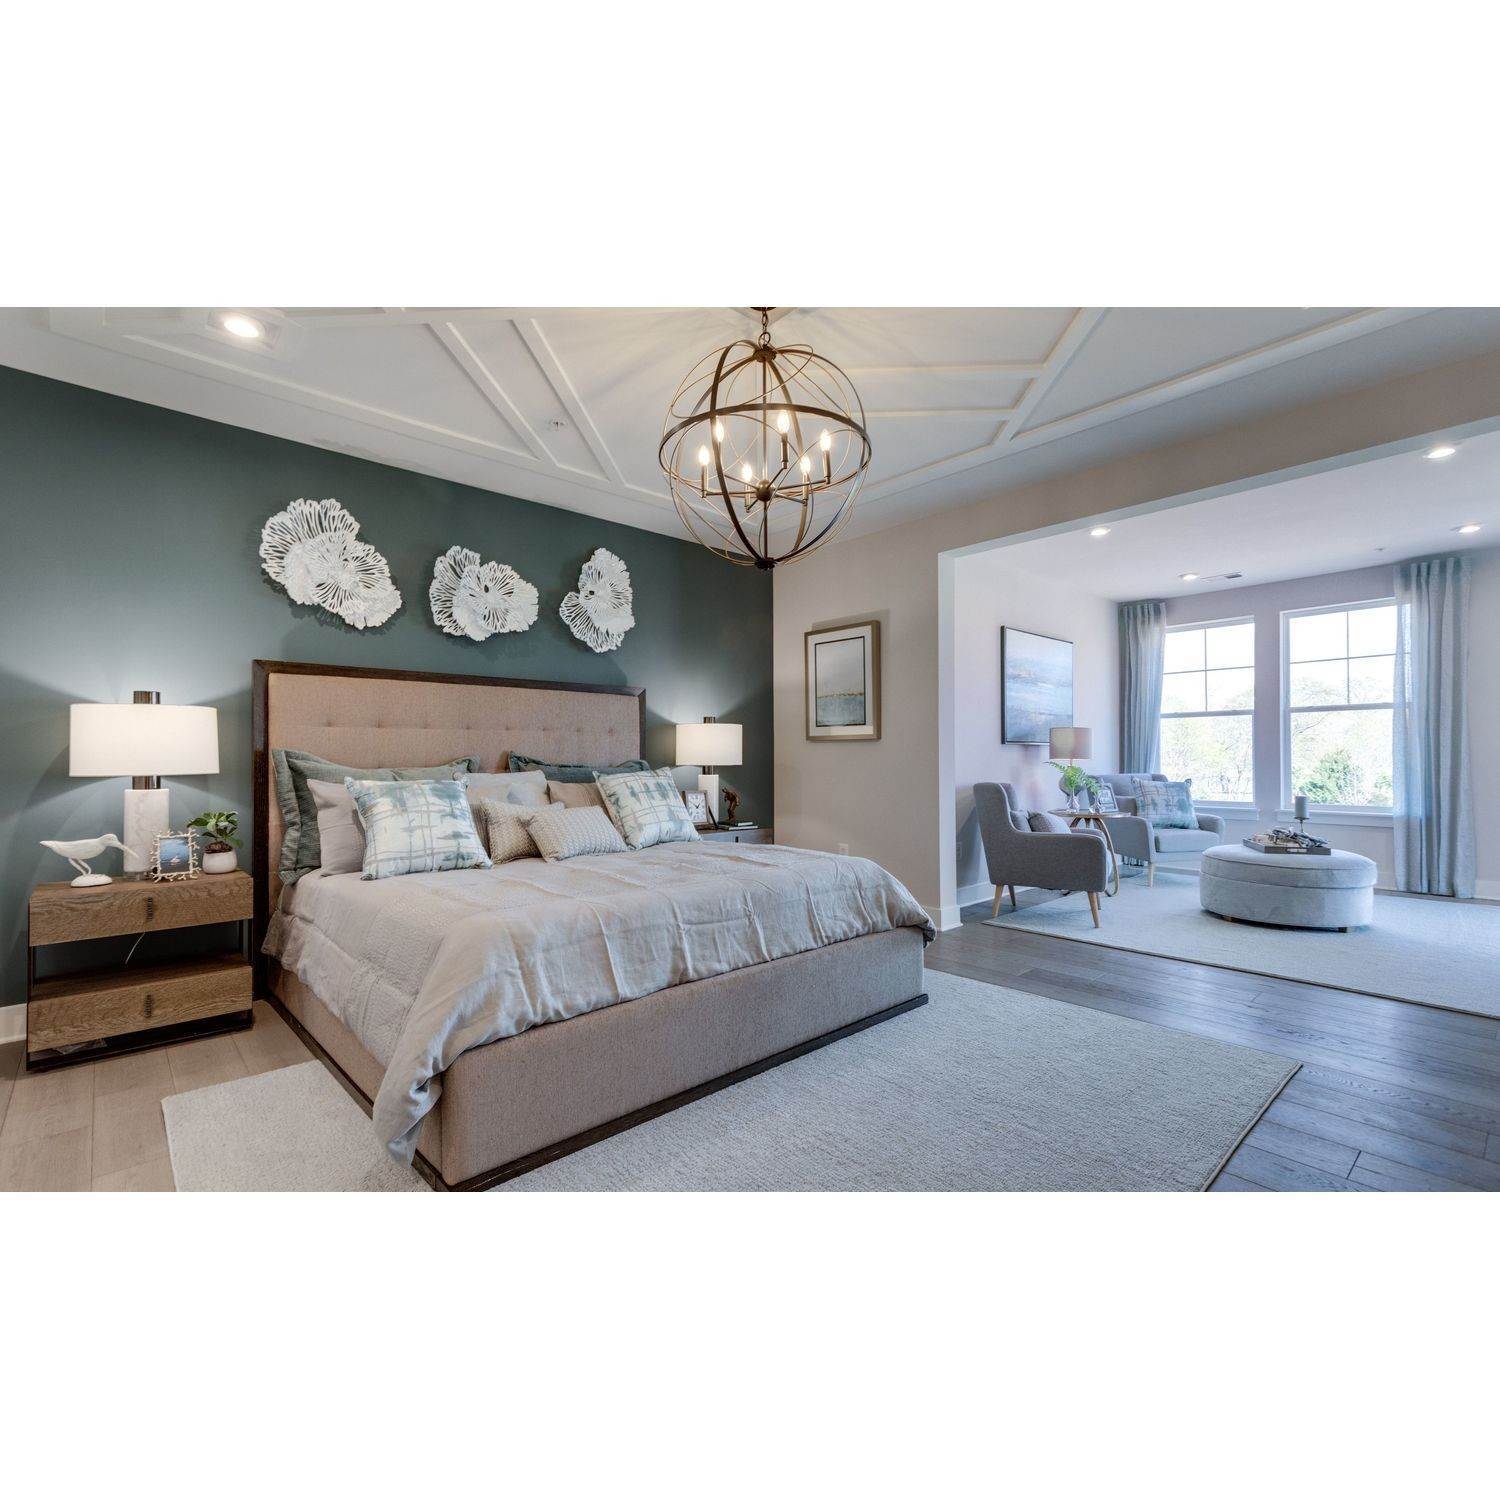 4. K. Hovnanian’s® Four Seasons at Kent Island - Luxury Condos κτίριο σε 131 Flycatcher Way, Chester, MD 21619